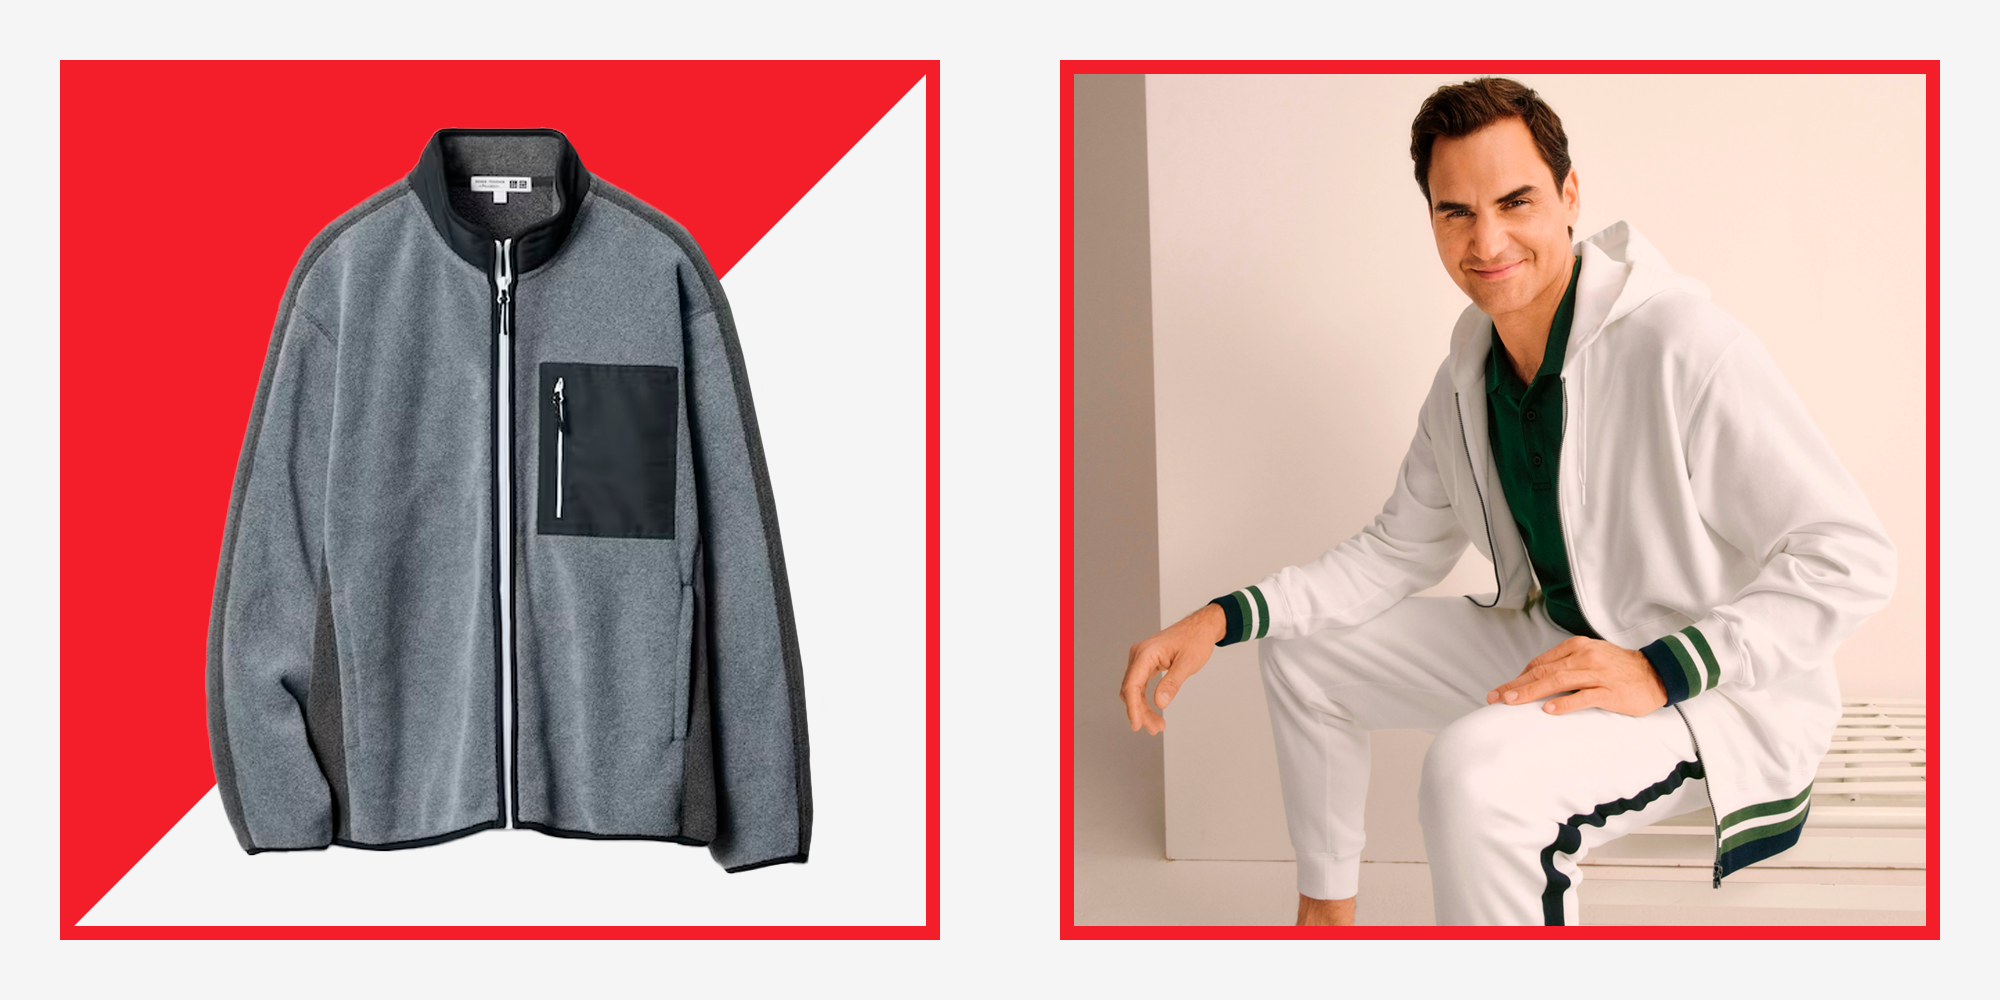 Uniqlo's Roger Federer Collection by JW Anderson: How to Buy